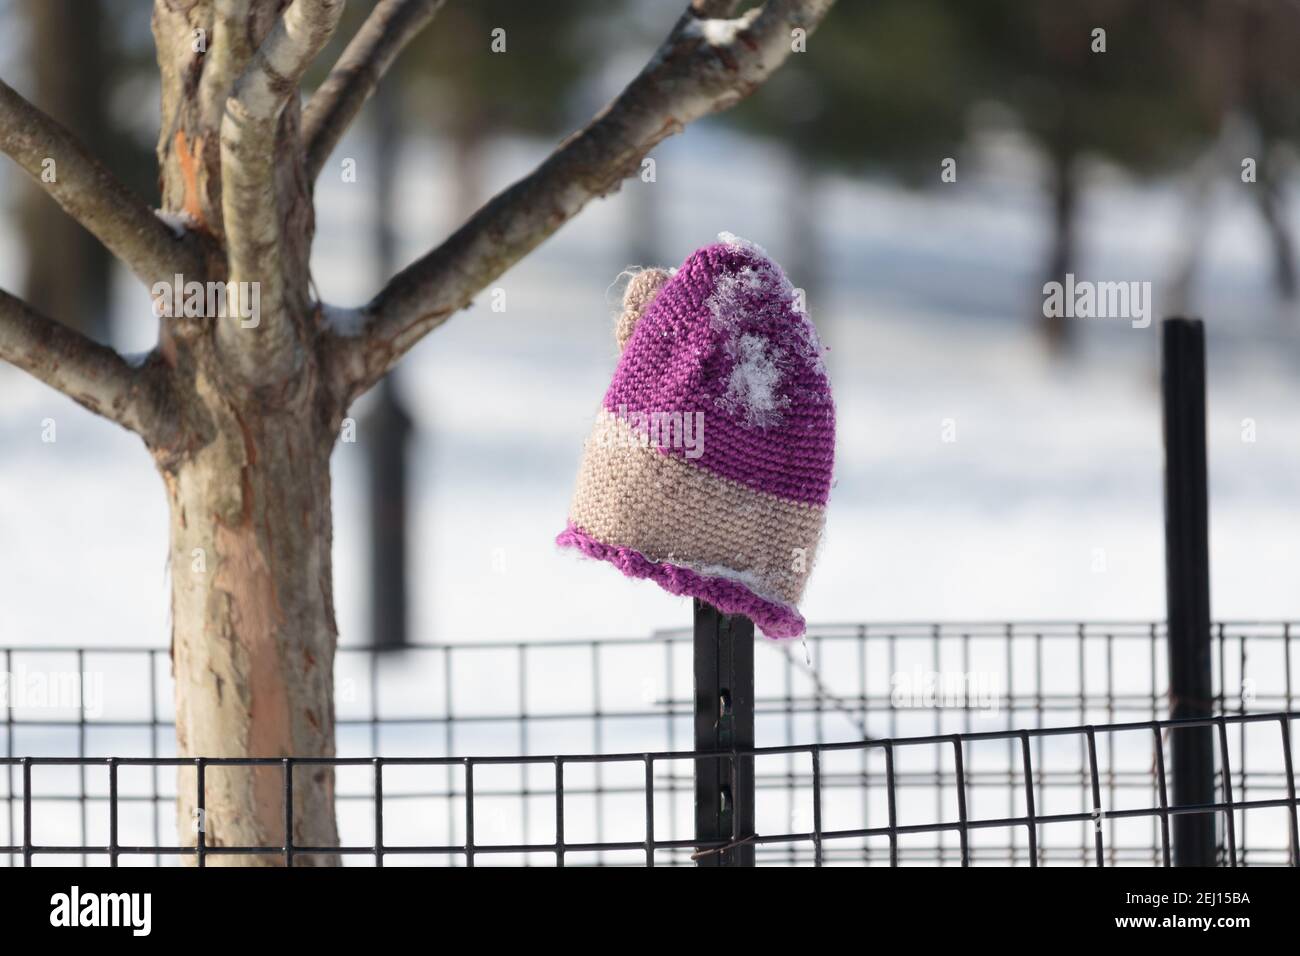 a pink knit hat covered with snow hangs on a park fence next to a tree, as if lost, in Winter after a snowstorm, snow covers the ground Stock Photo